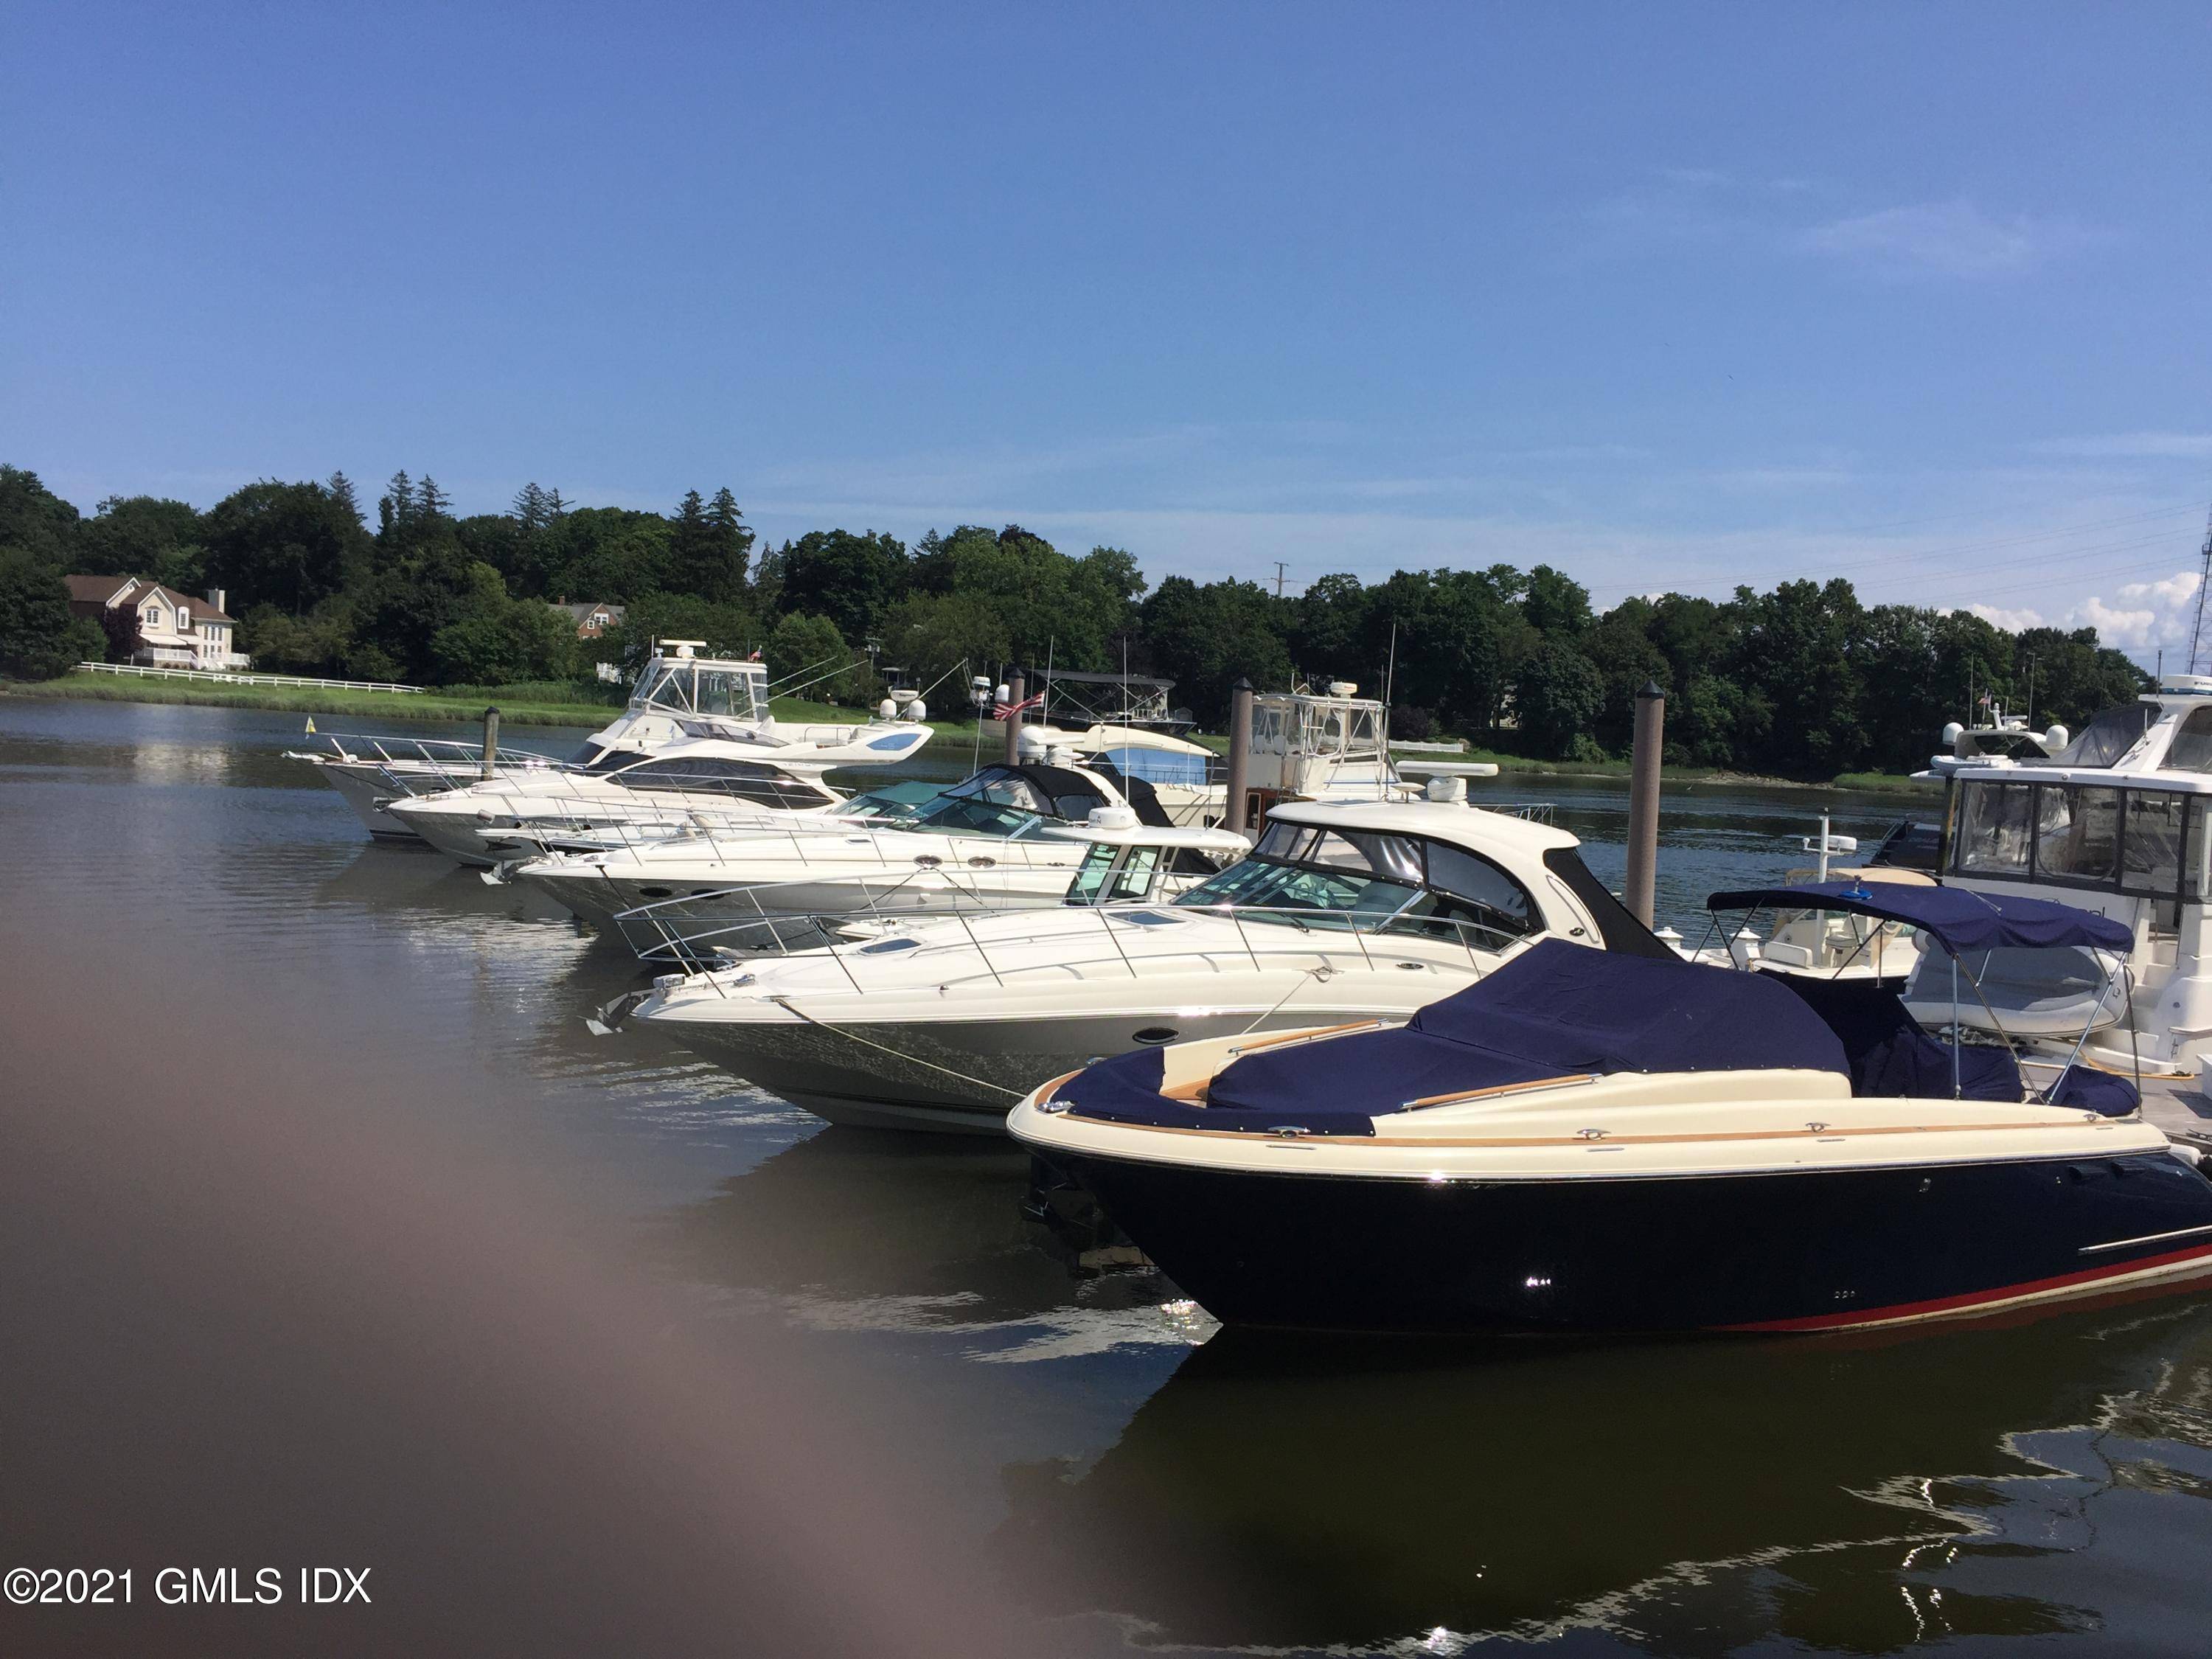 Prime and private location and one o the largest slips available at popular Palmer Point Marina.